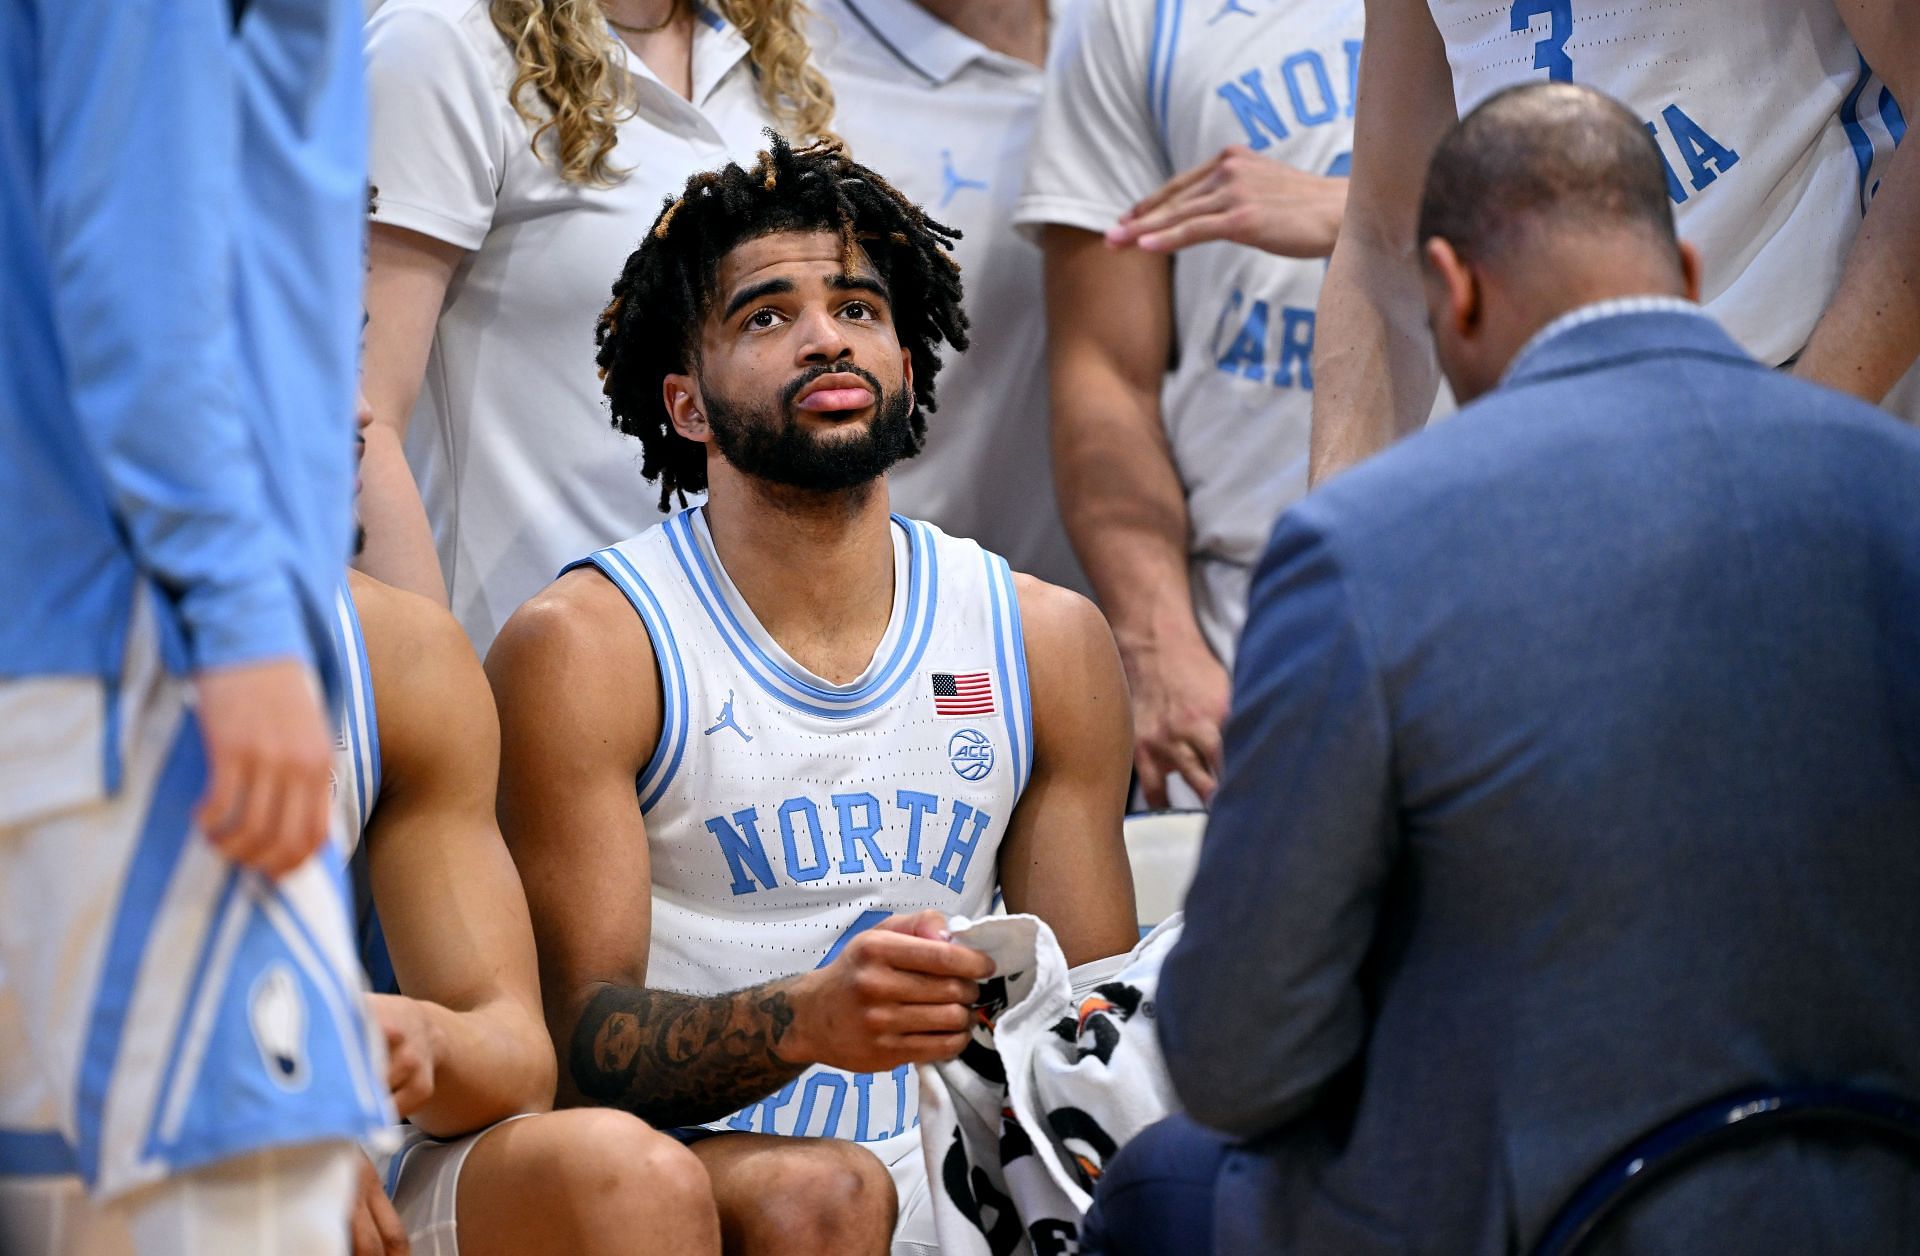 North Carolina guard RJ Davis, who will look to move UNC up the list of most 21st century NCAA Tournament wins.